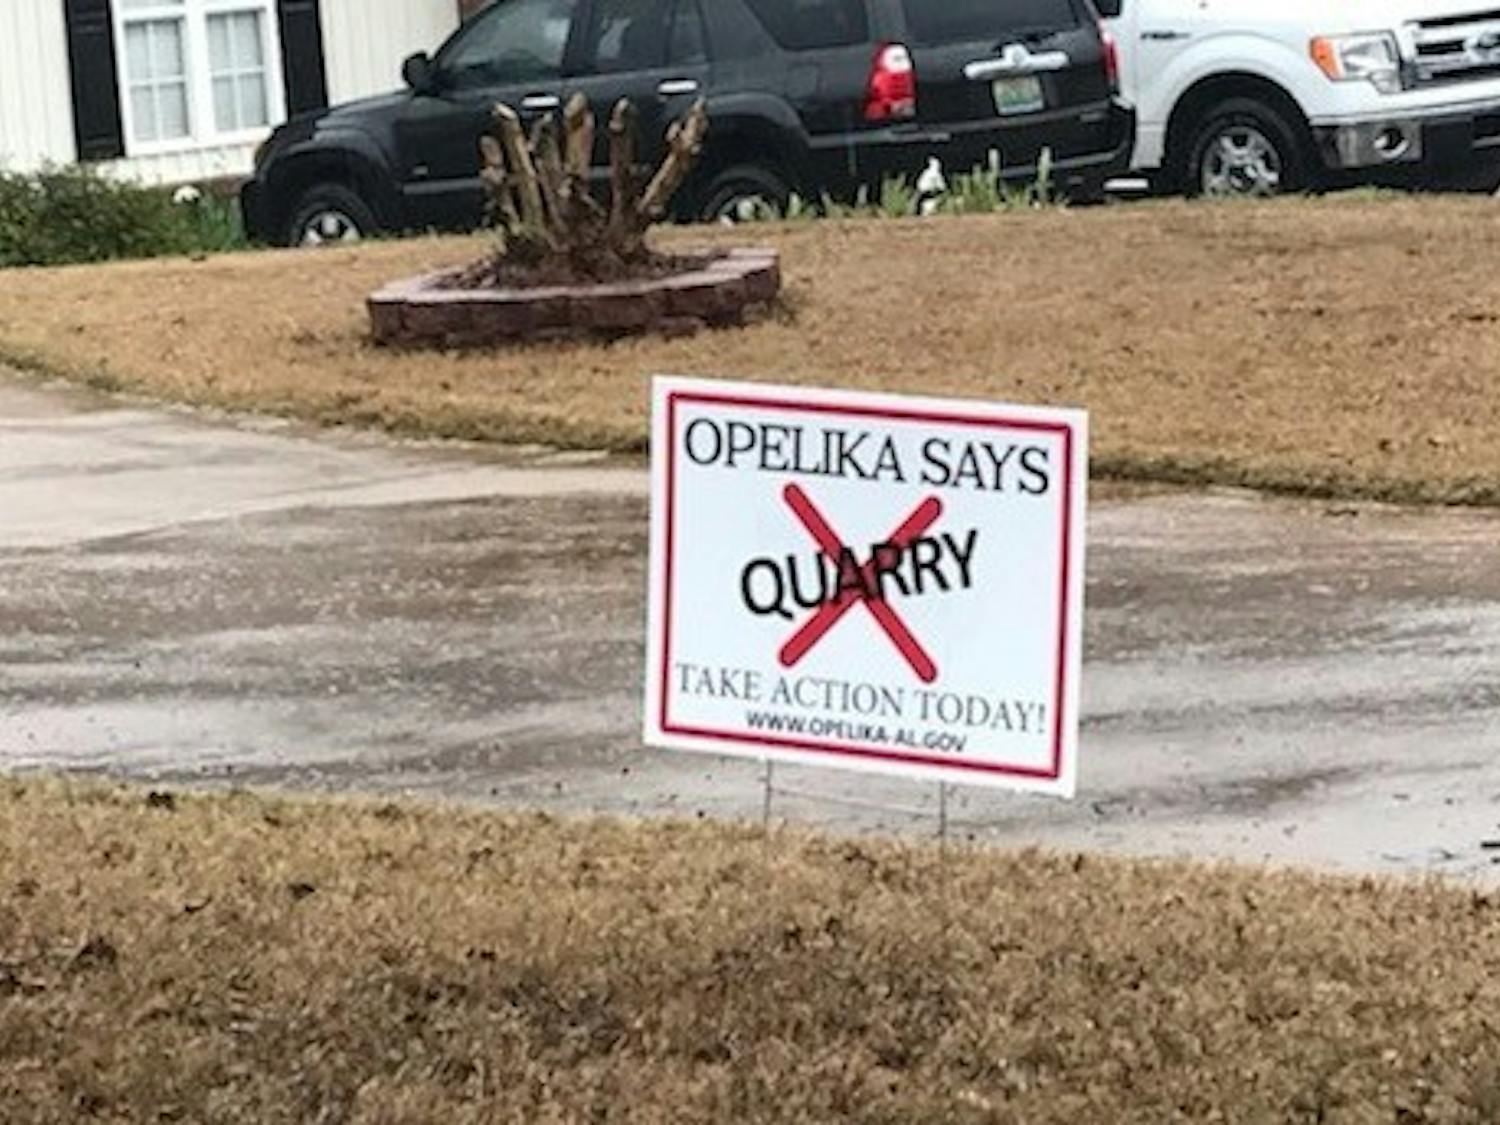 Opelika residents protest the quarry with signs up throughout neighborhoods